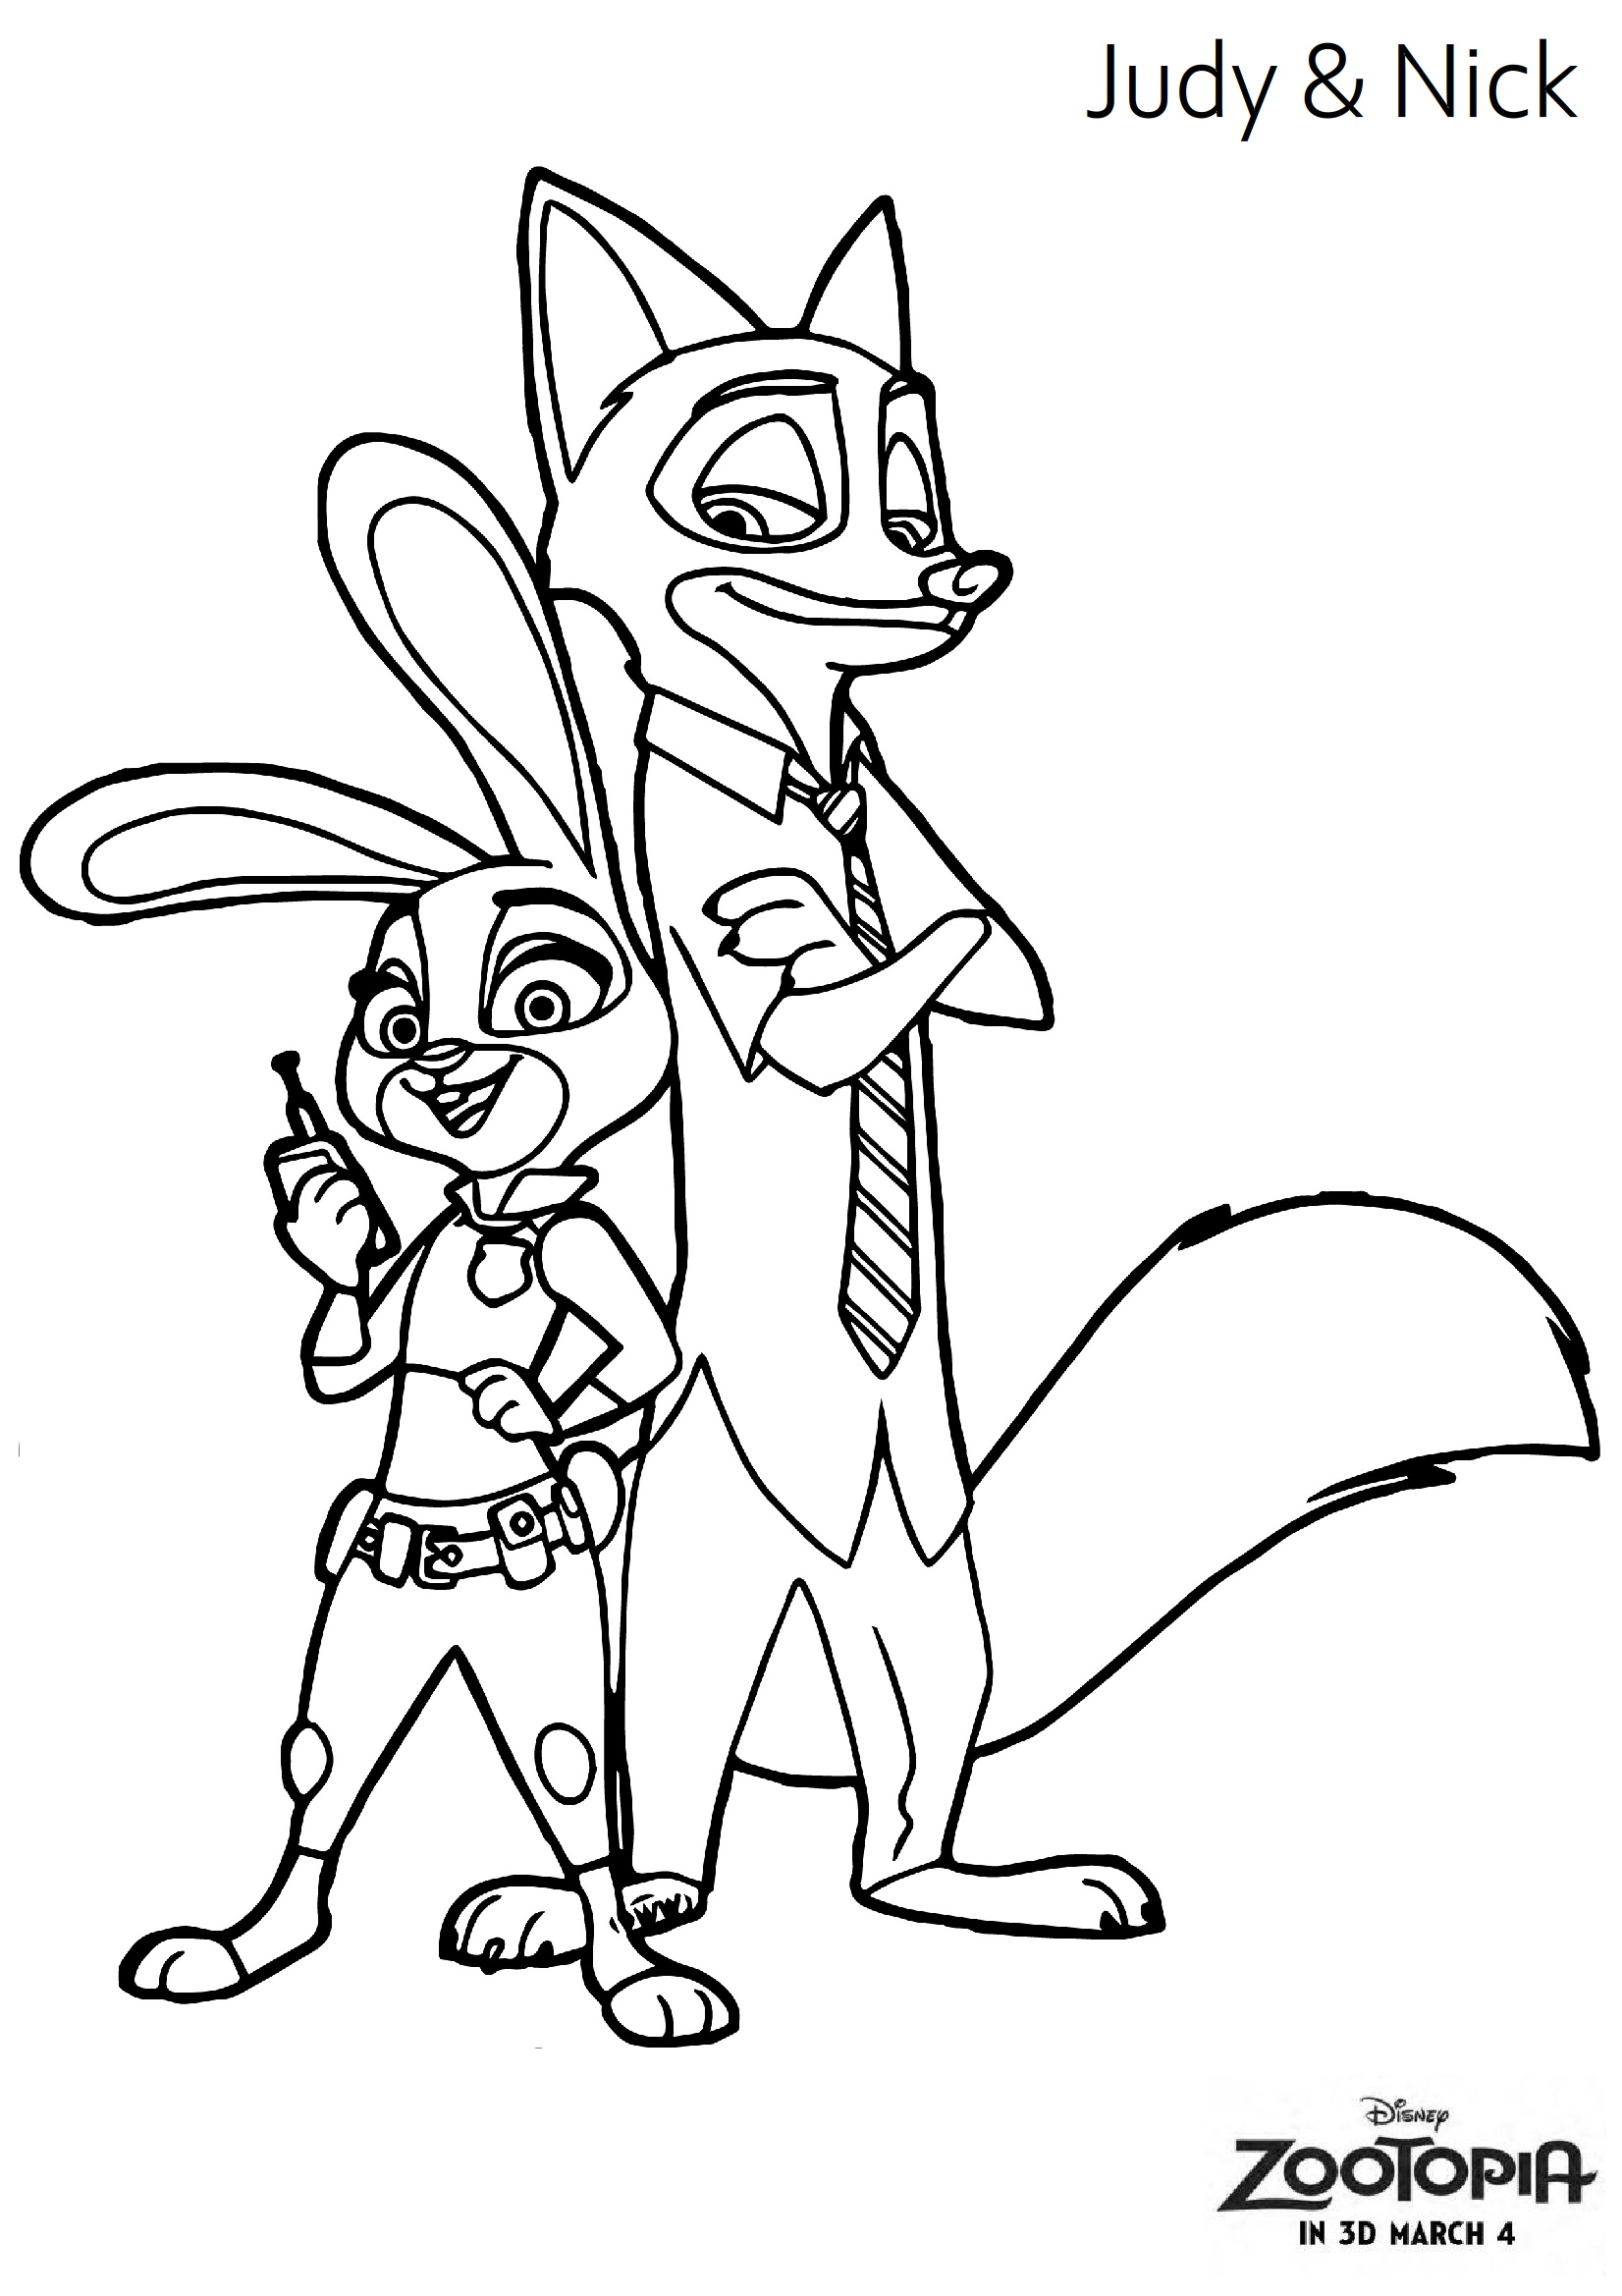 Zootopia Judy and Nick Coloring Pages for Kids